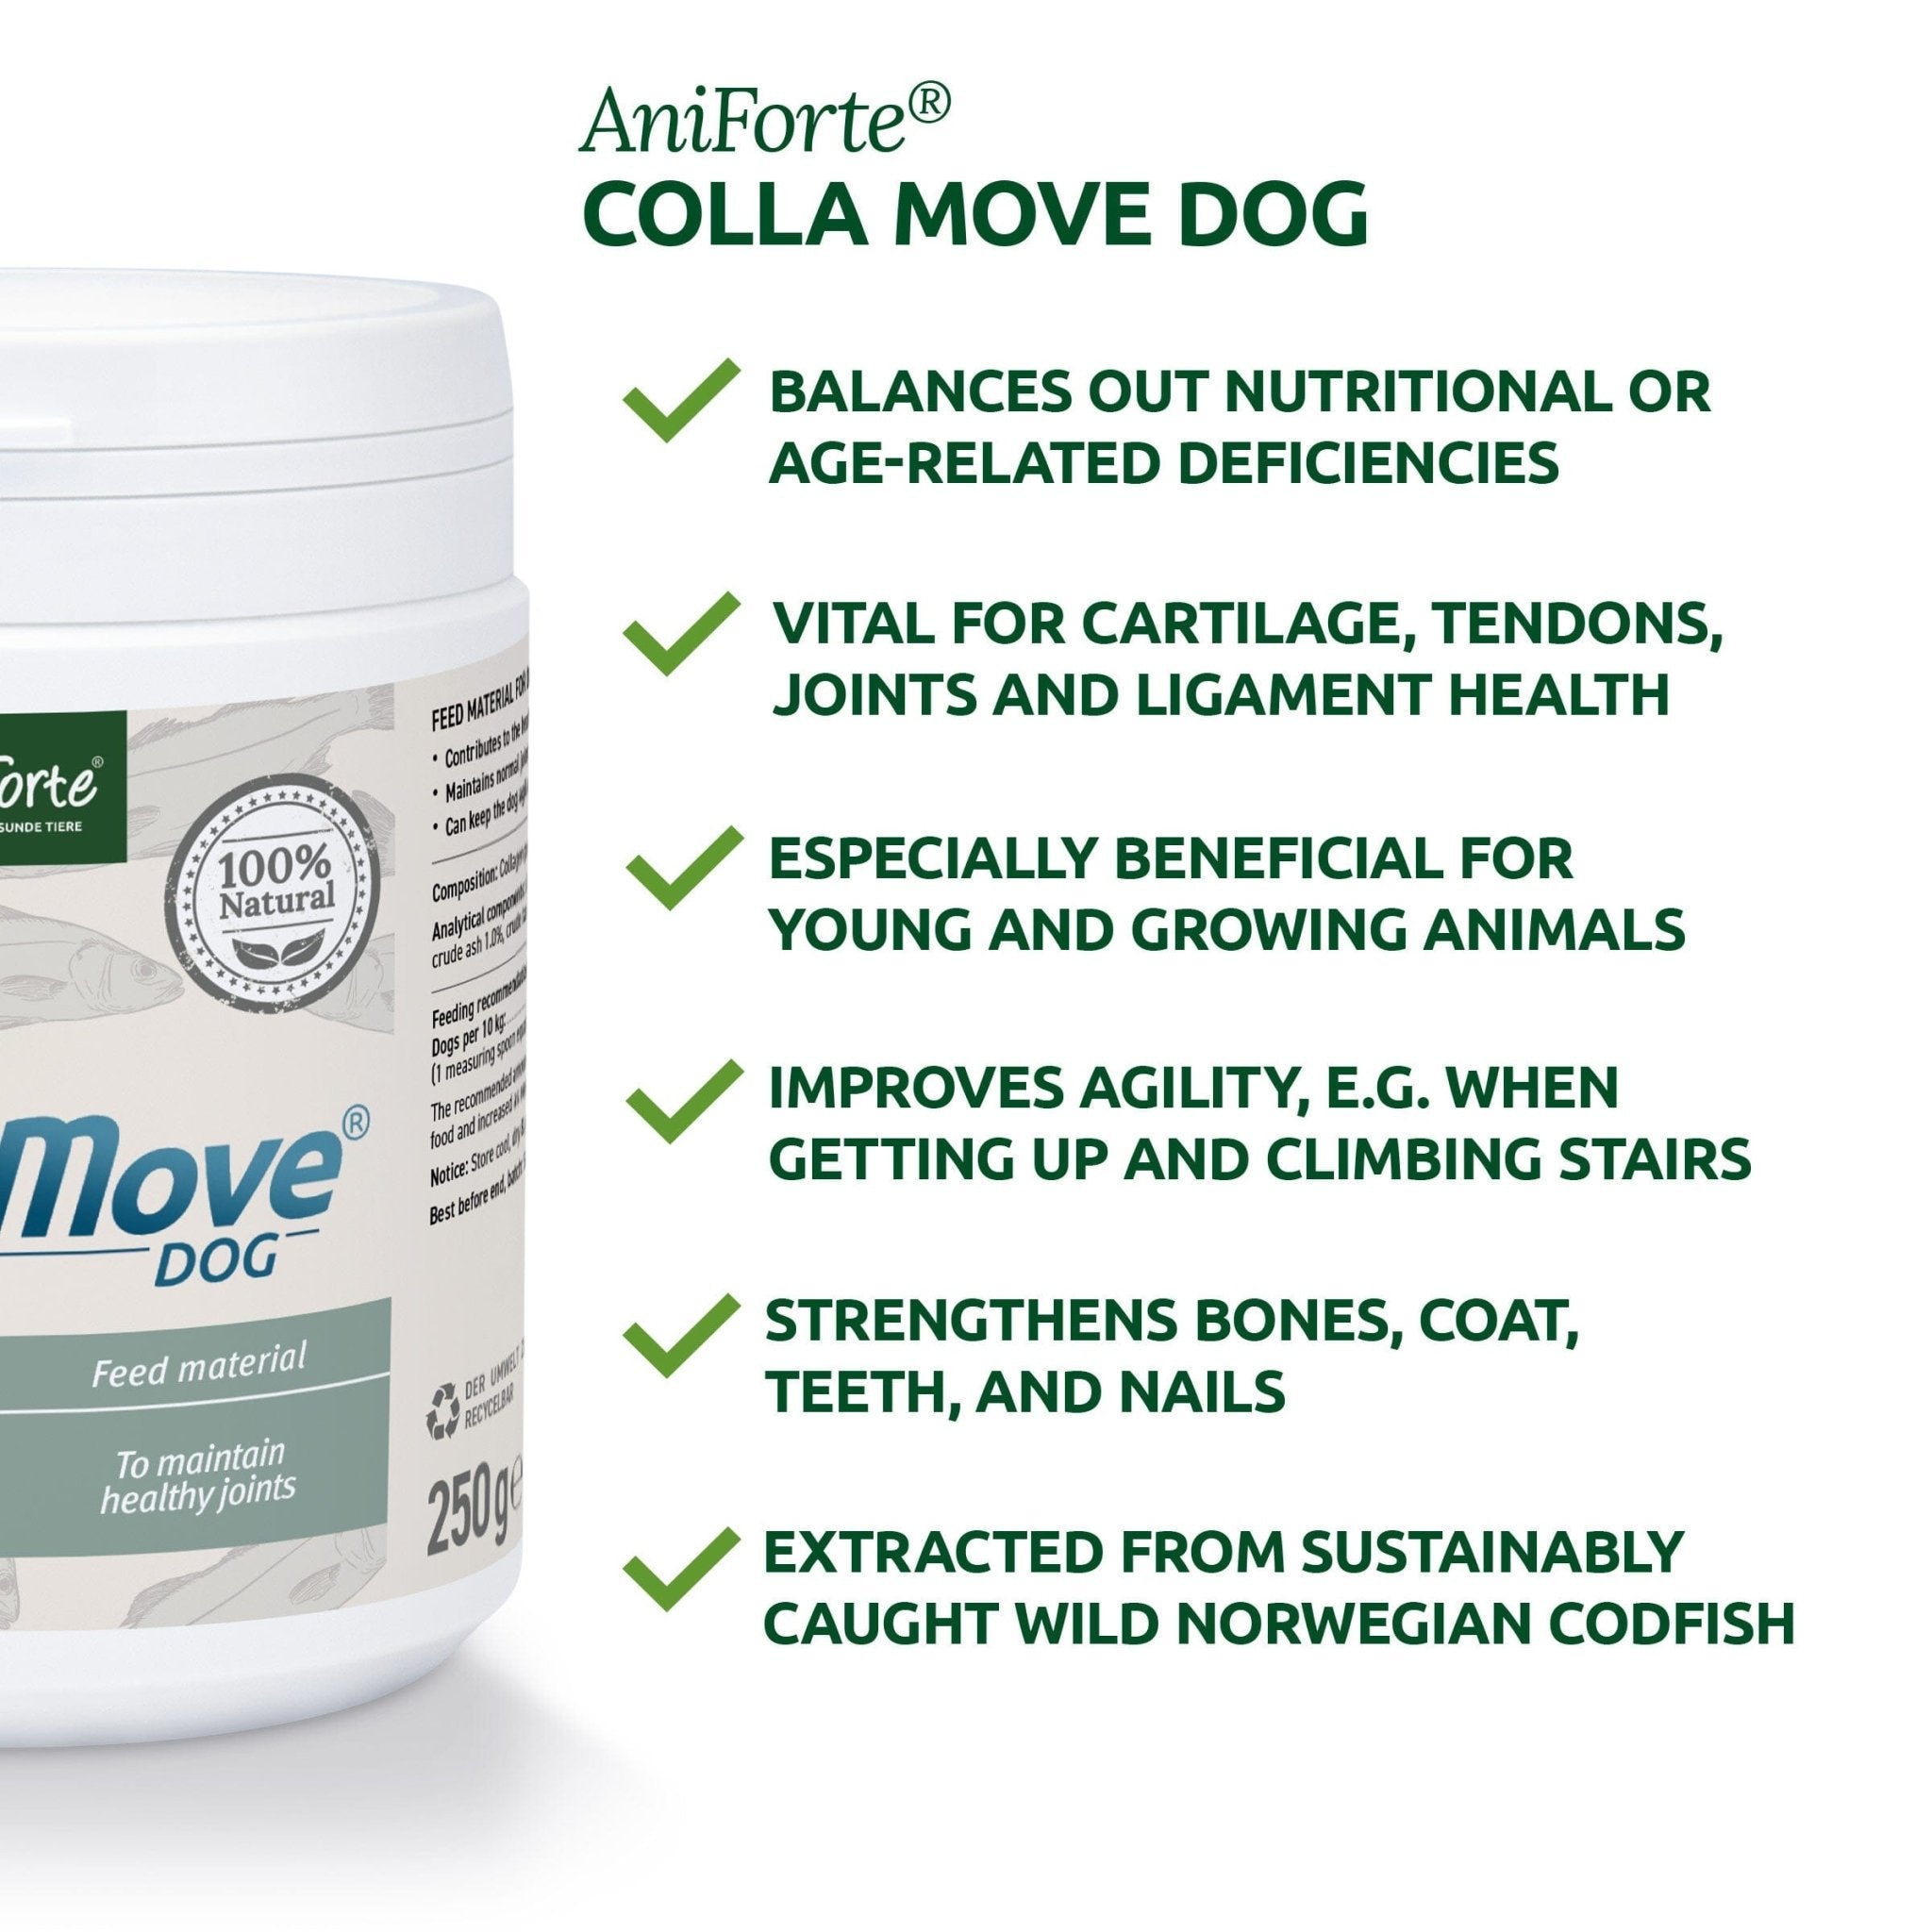 CollaMove Dog 250g - Supports Joints, Tendons, Ligaments & Cartilage - AniForte UK